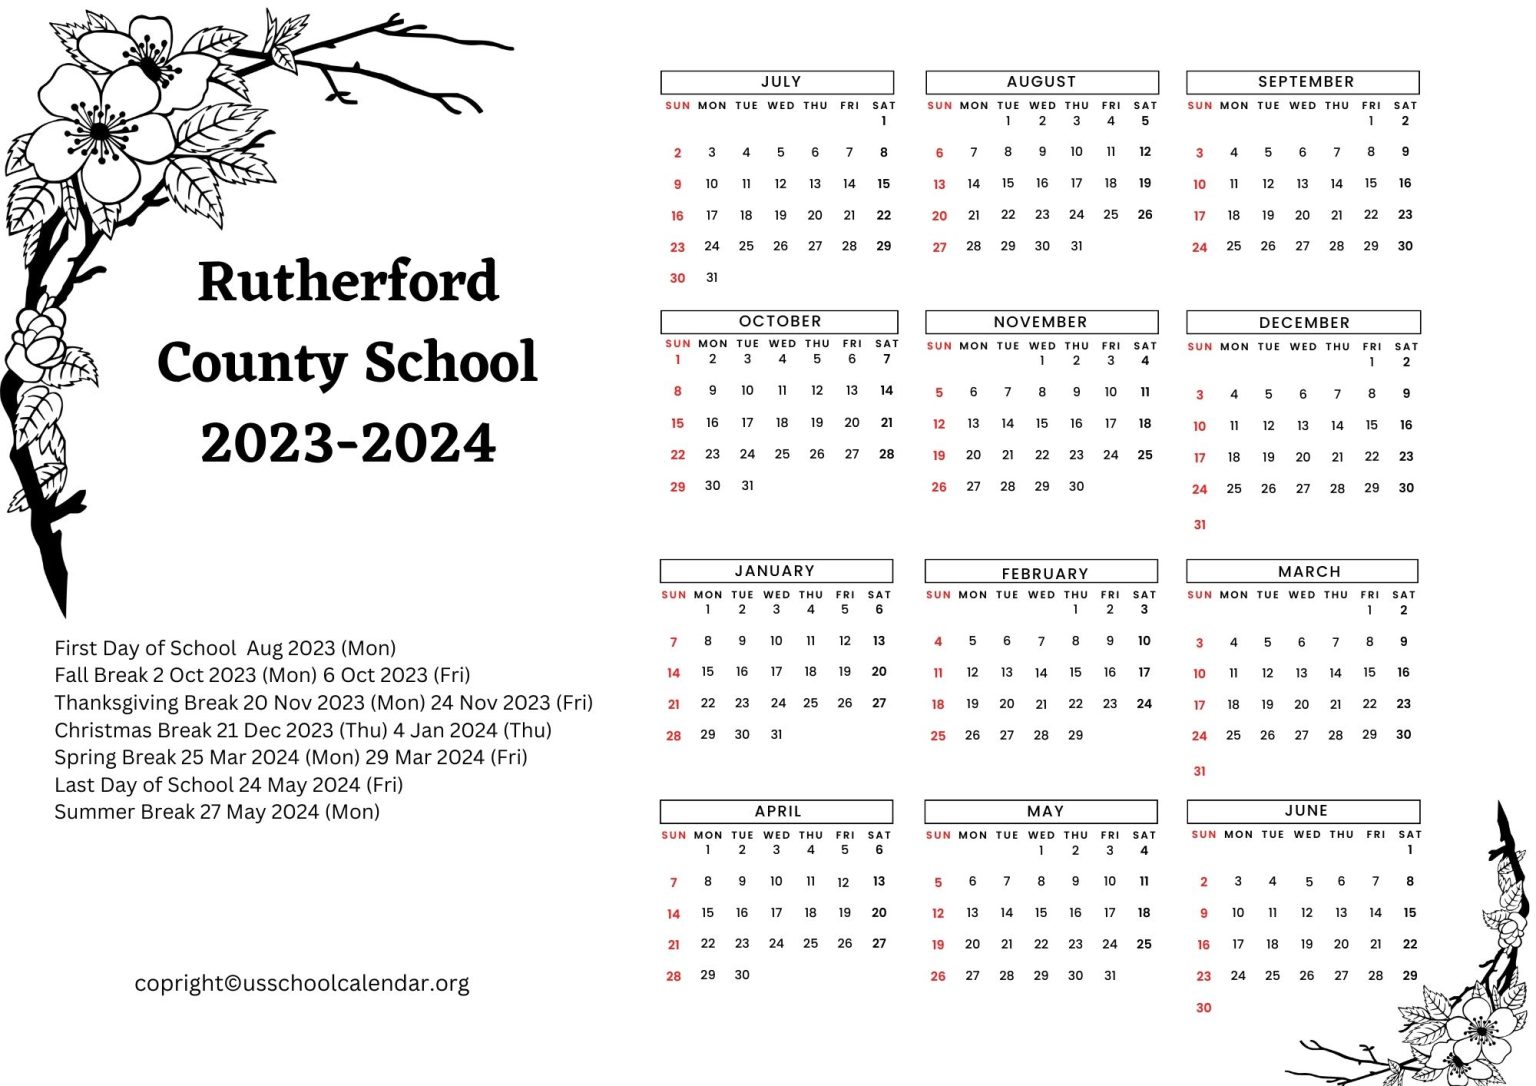 Rutherford County School Calendar with Holidays 20232024